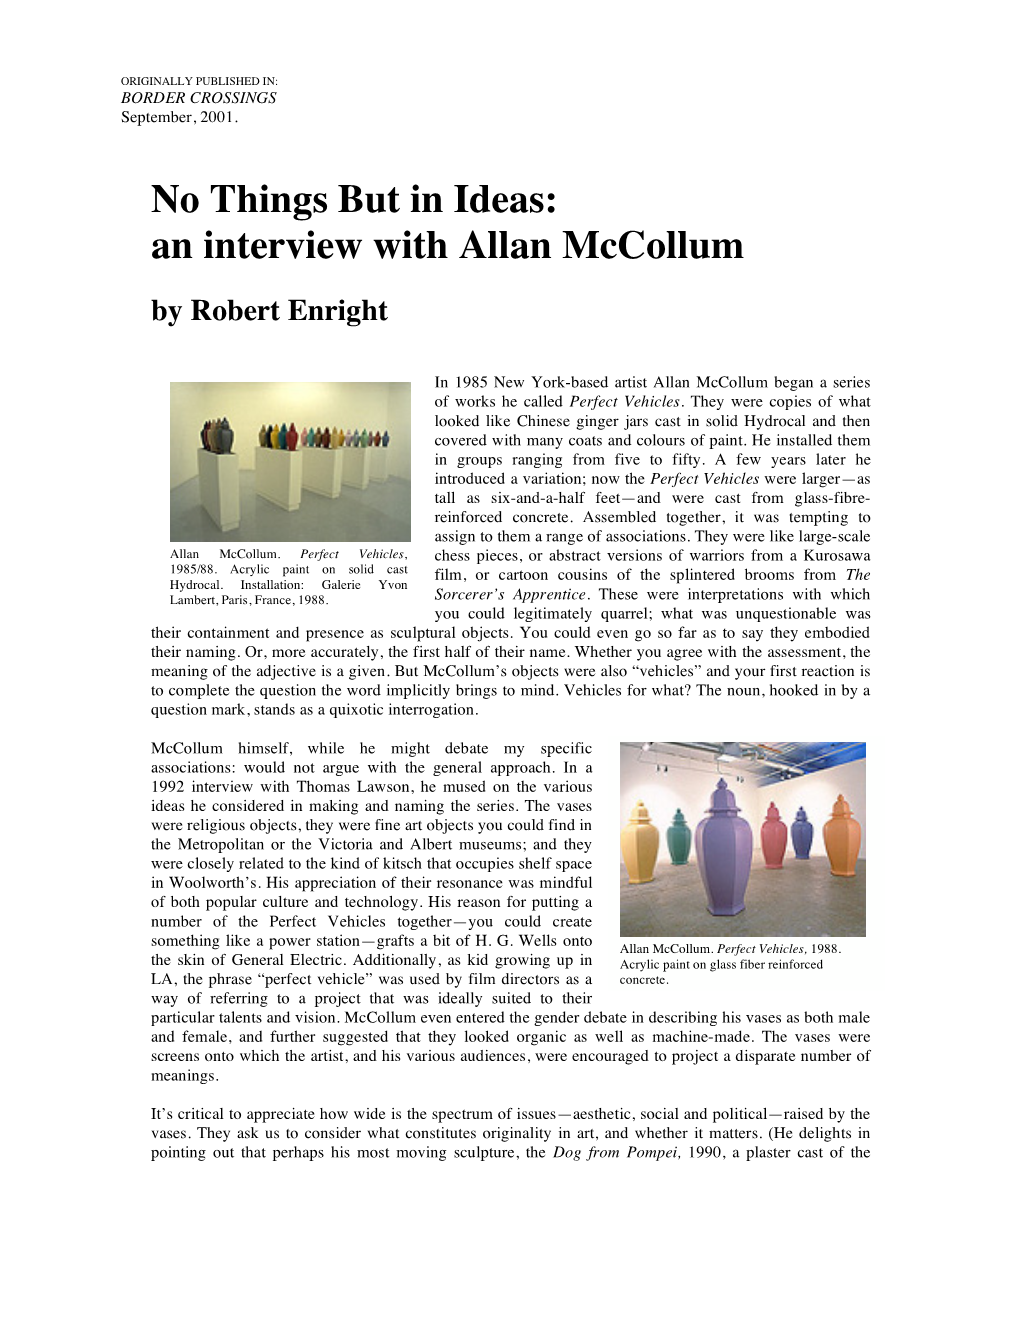 No Things but in Ideas: an Interview with Allan Mccollum